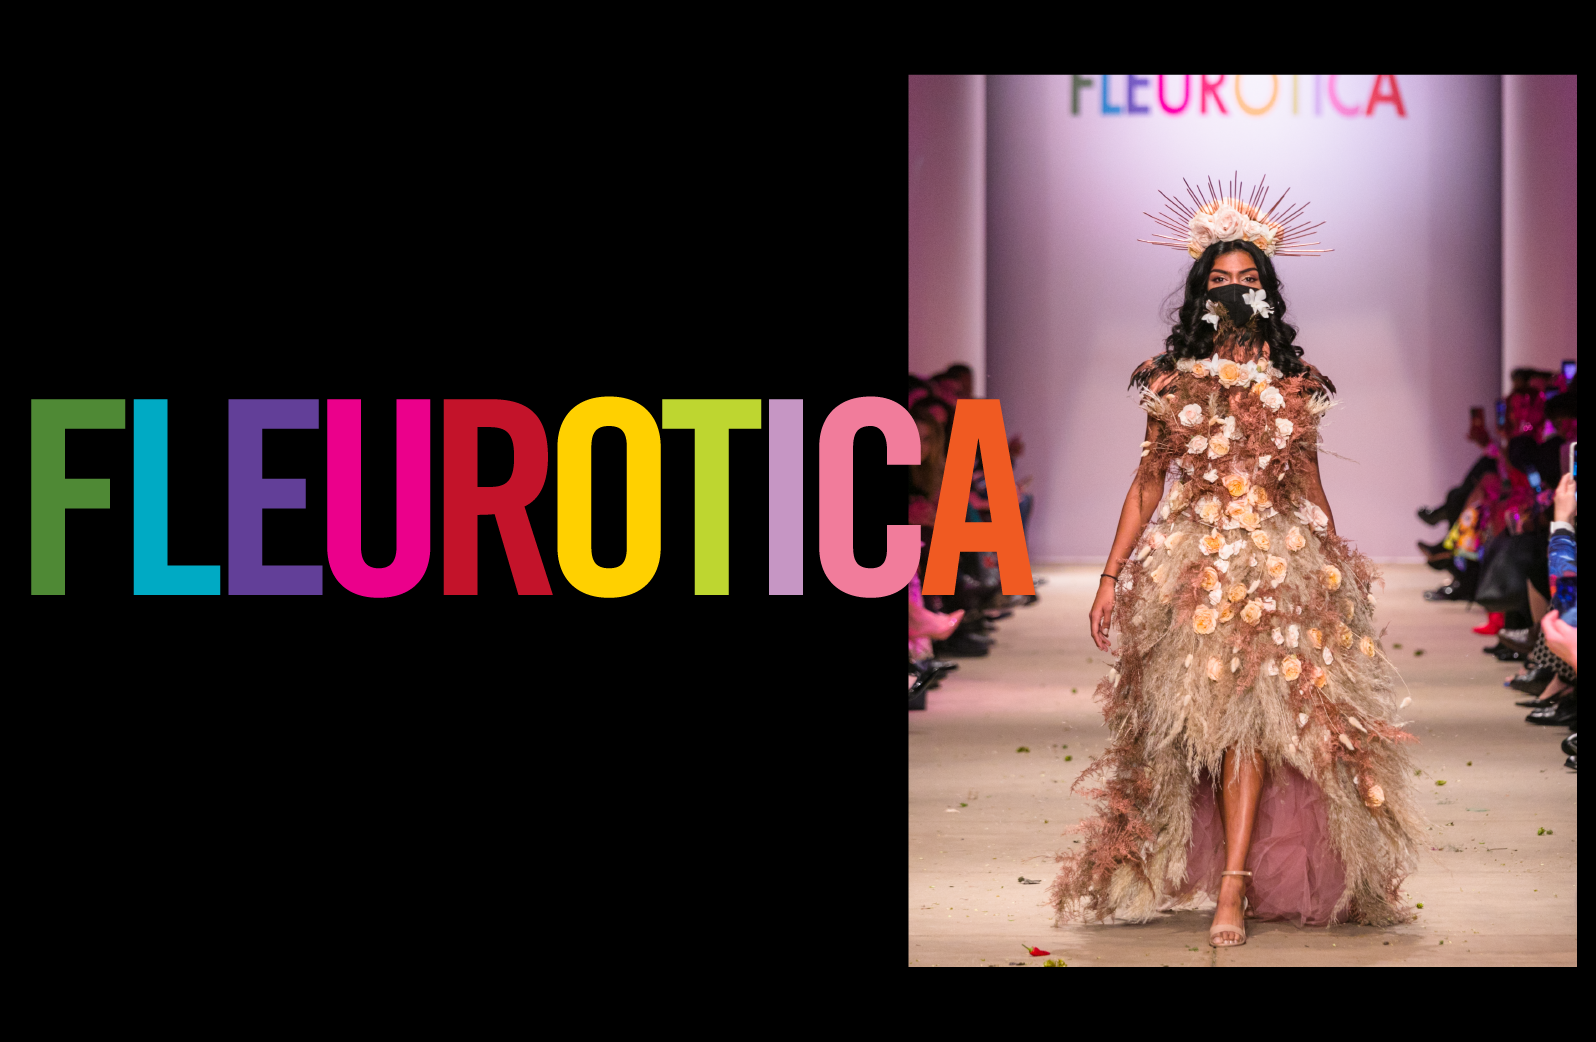 Event name logo spelled FLEUROTICA in bright rainbow colors and to the right a model wearing a fashion outfit made of plants struts down a runway.